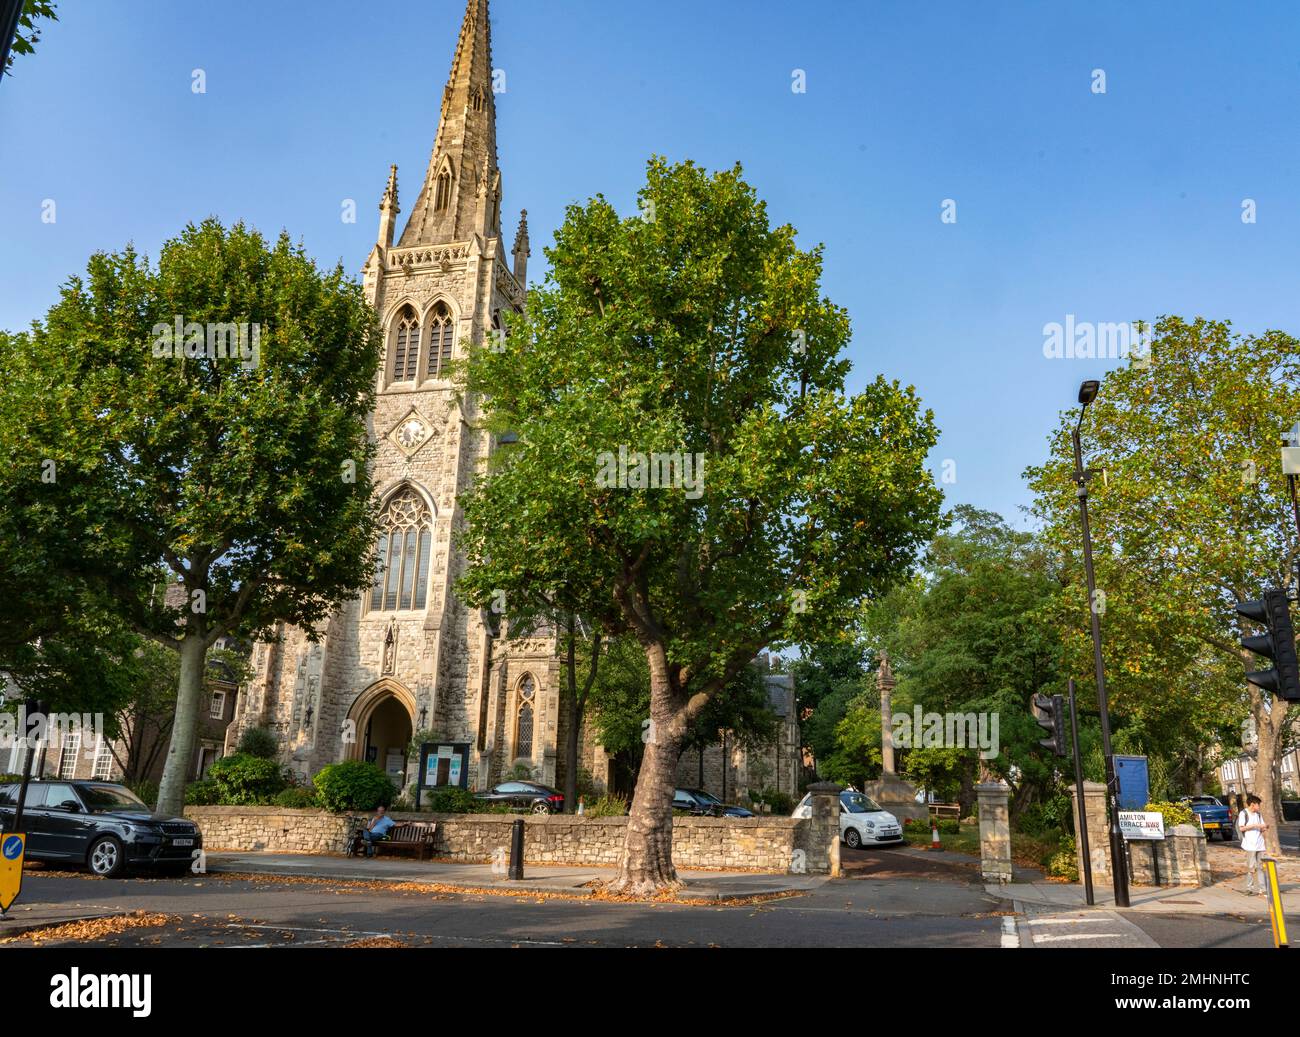 File picture of St Mark's Church, Hamilton Terrace, St John's Wood, London. The Heritage listed Church was destroyed by a fire during the evening of January 26, 2023. Credit: Rob Taggart/Alamy Stock Photo